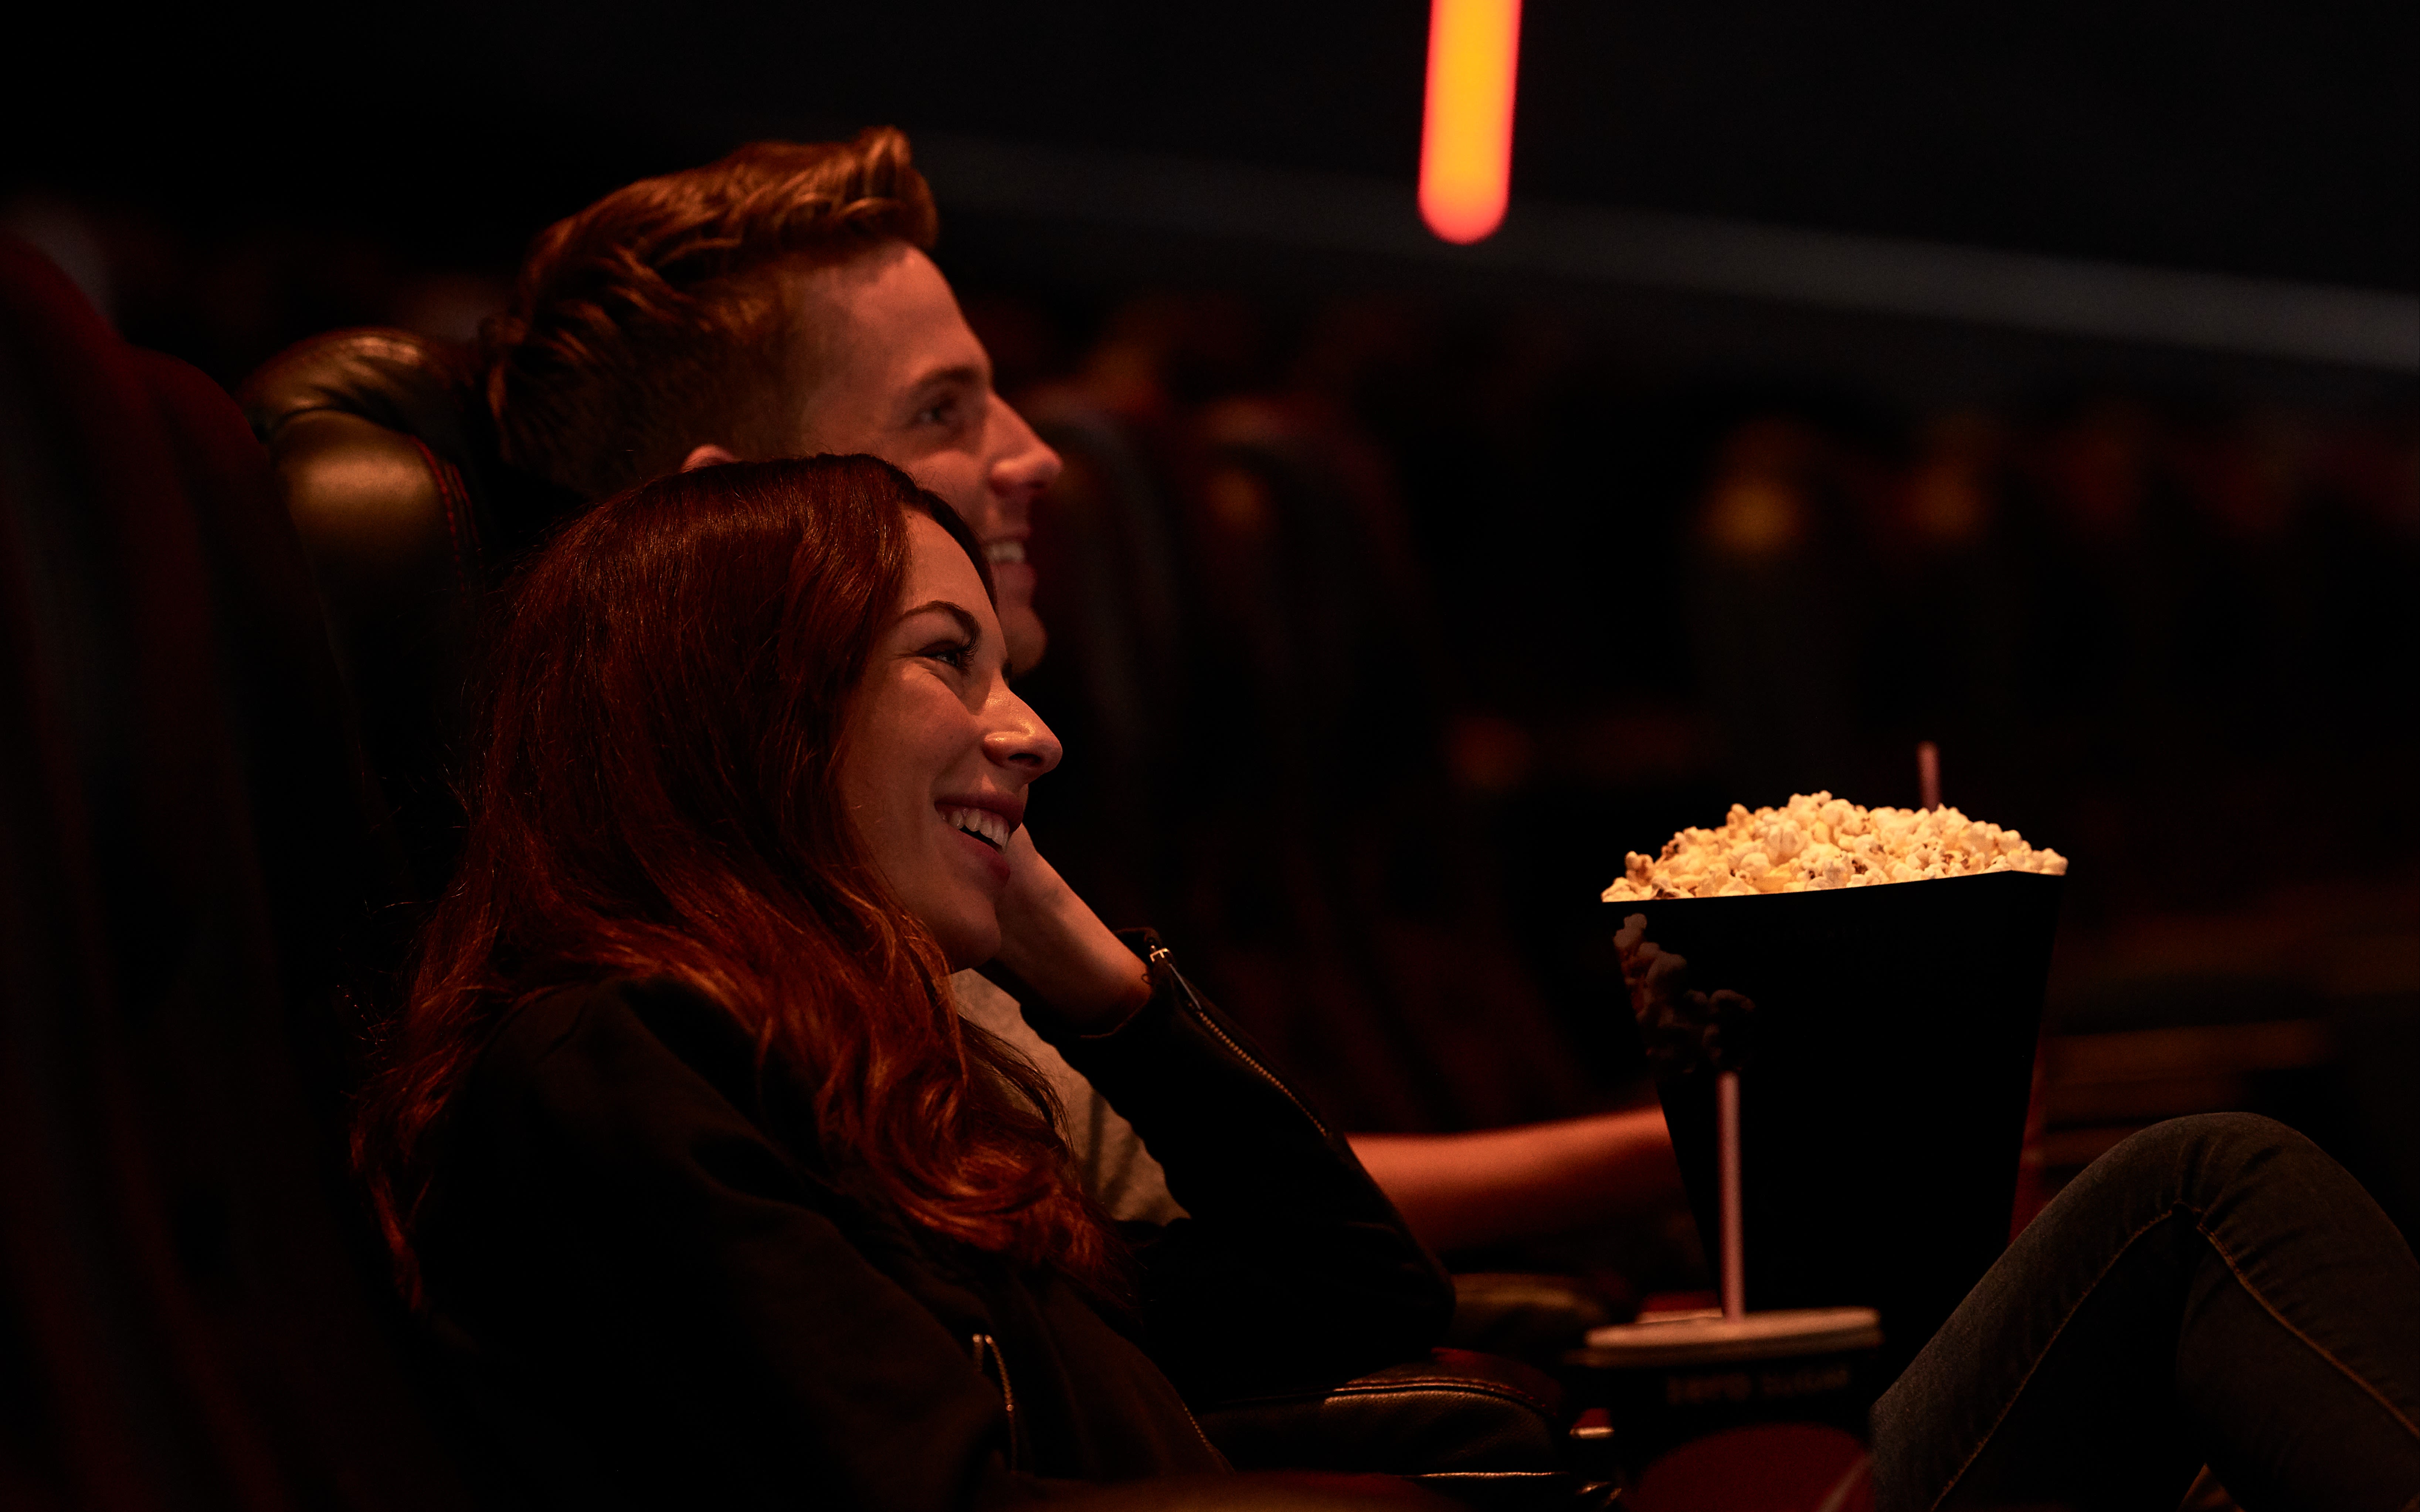 Image of a couple at the Cinema.